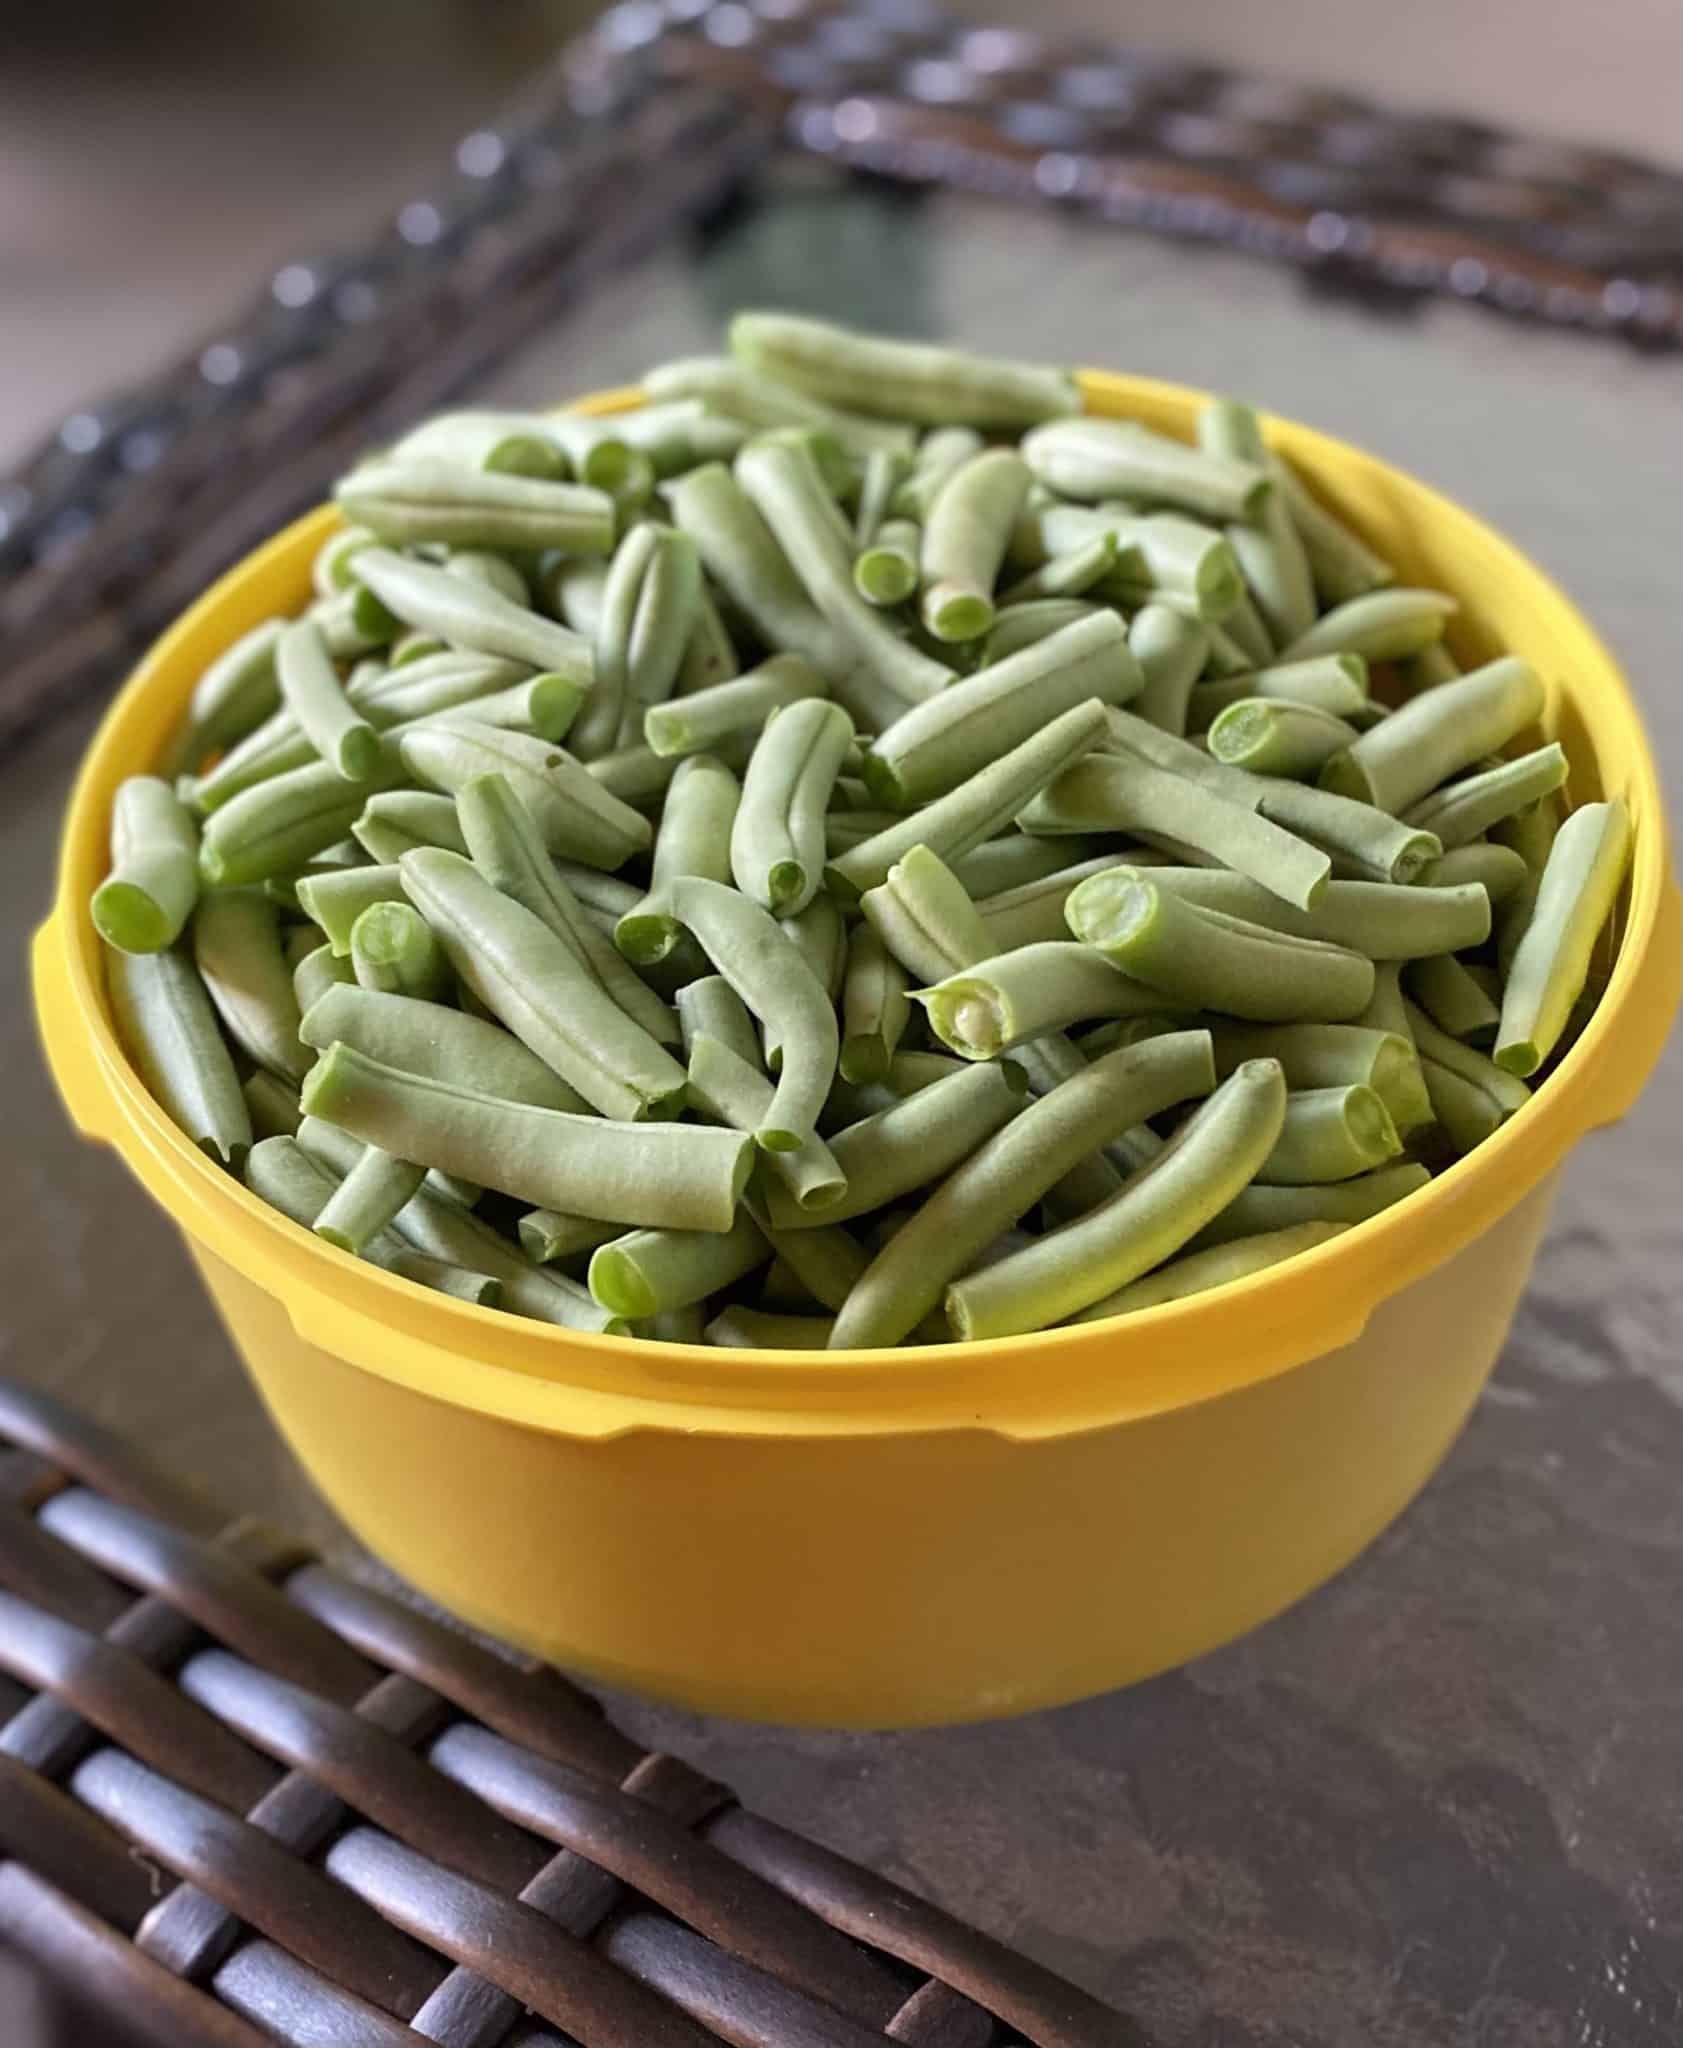 A yellow Tuperware bowl full of freshly snapped green beans